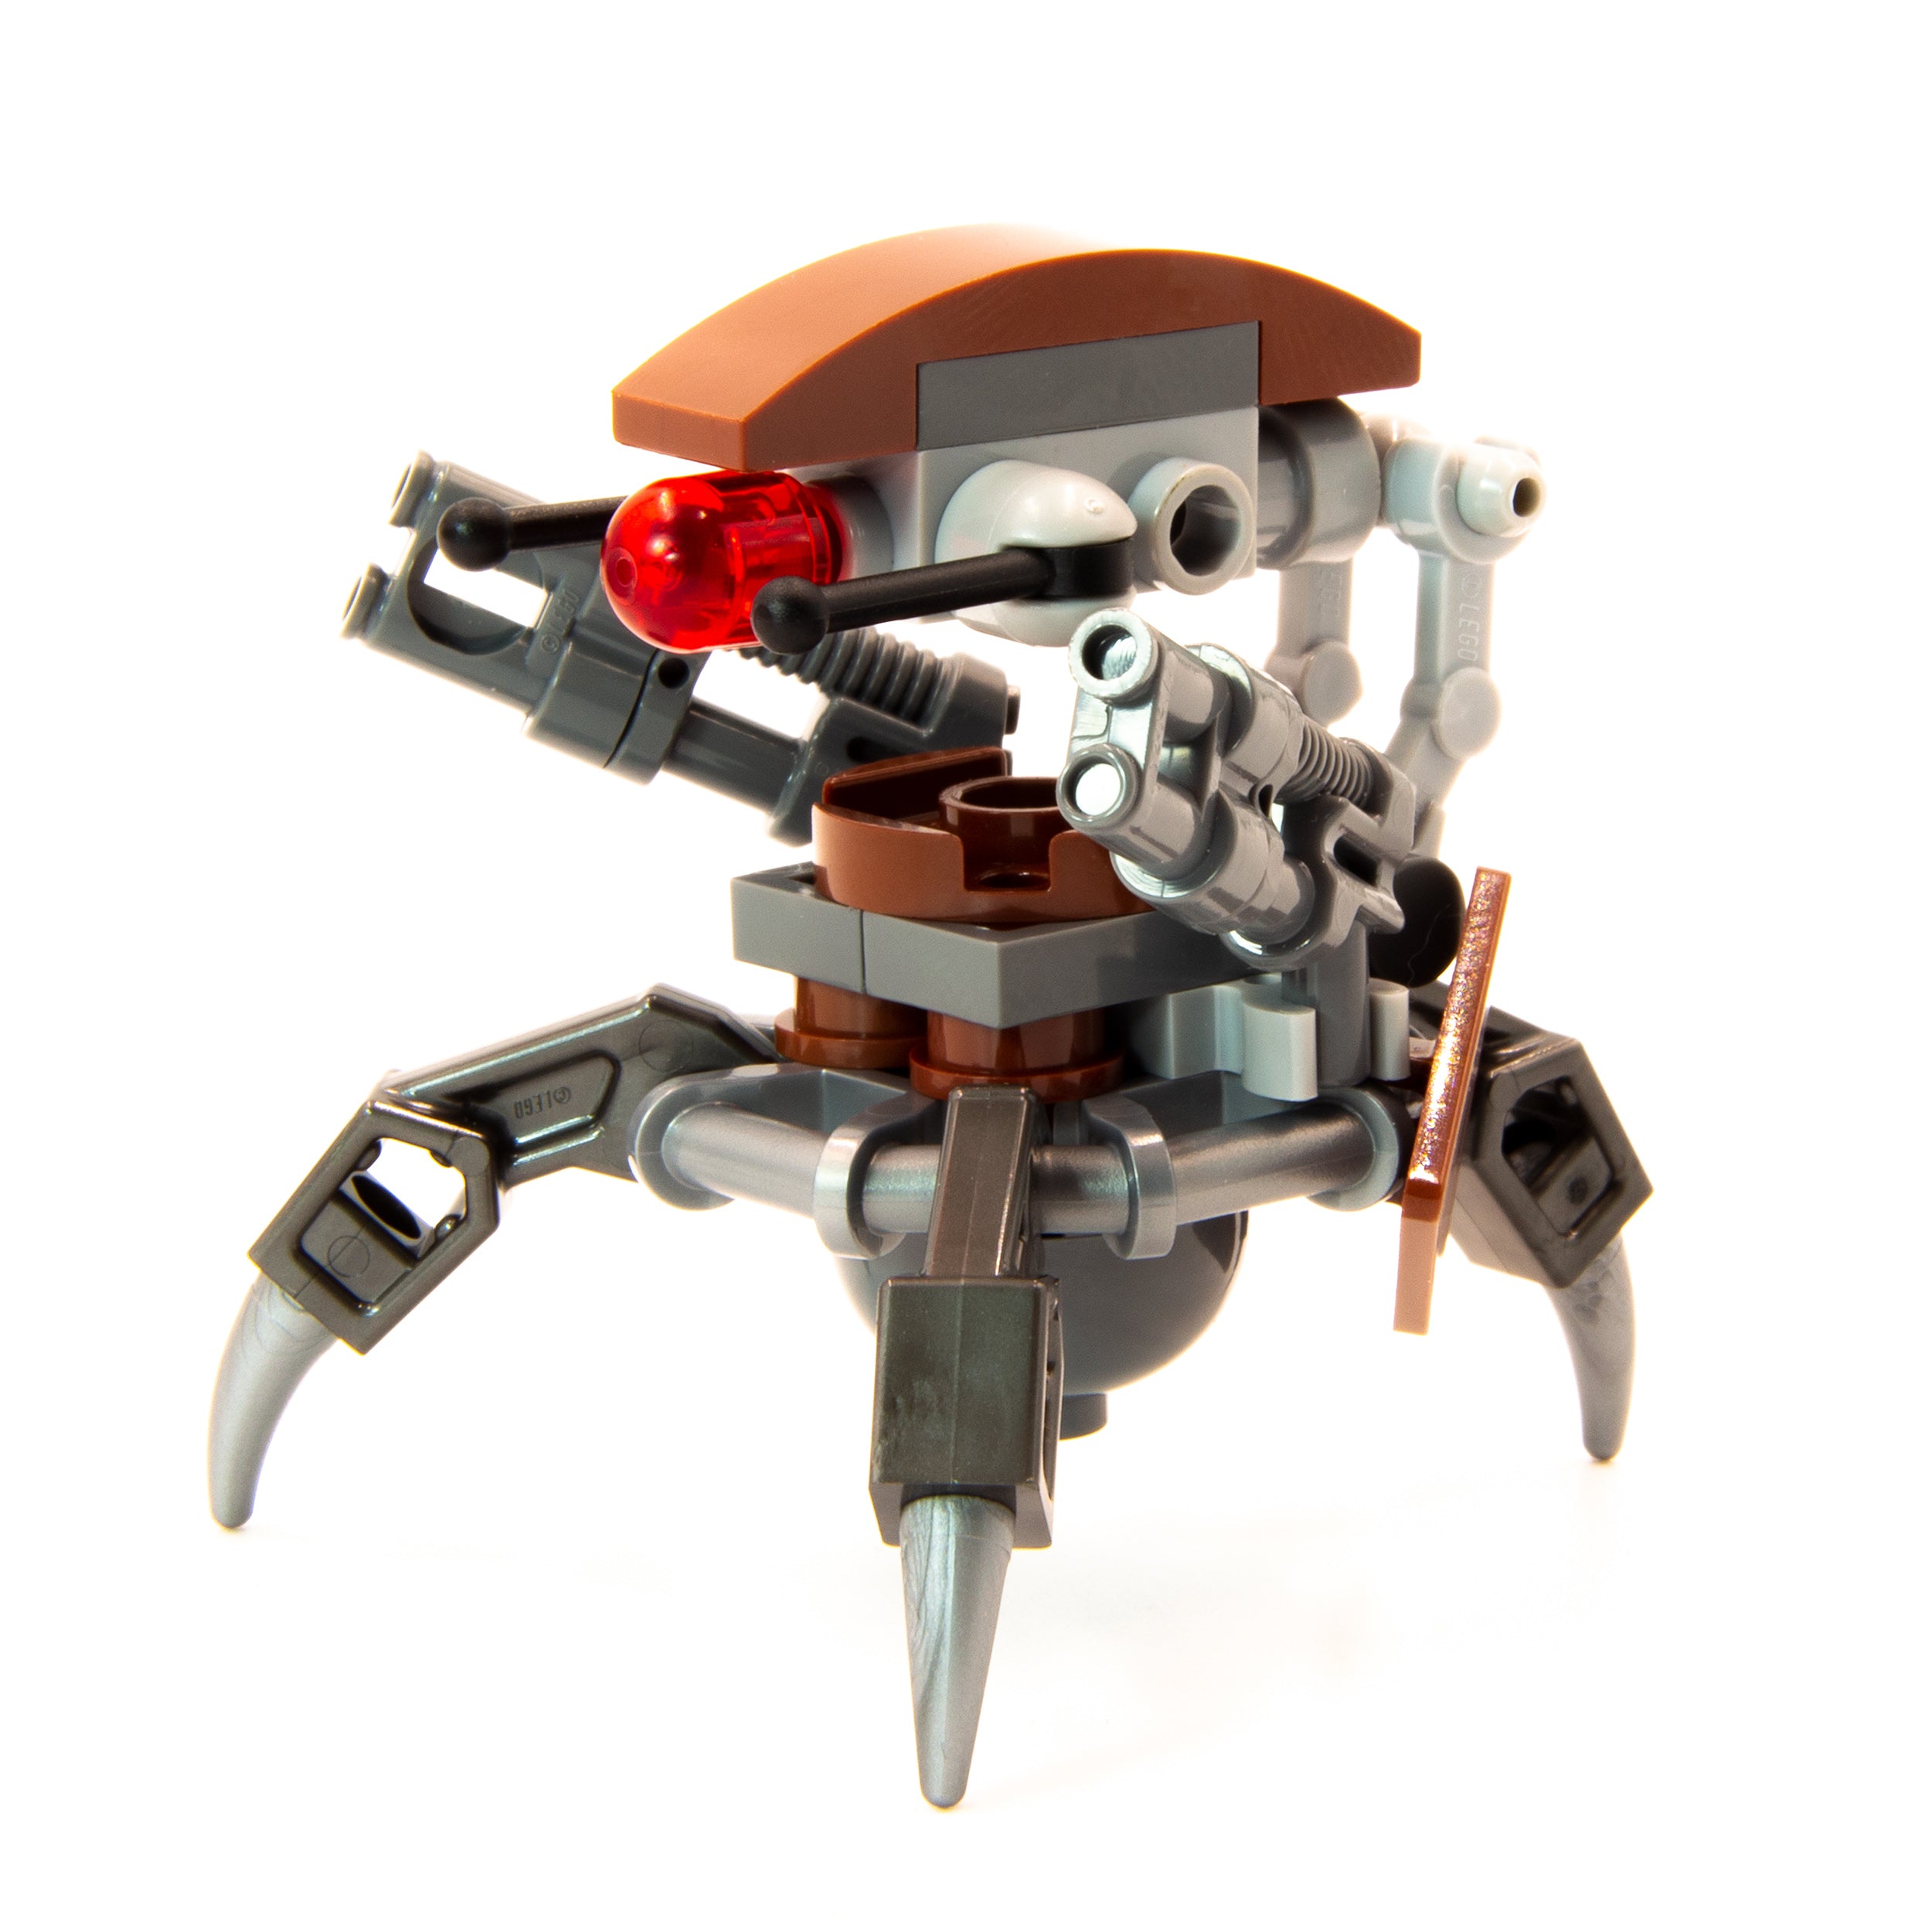 LEGO Star Wars Minifigure - Droideka (without stickers)